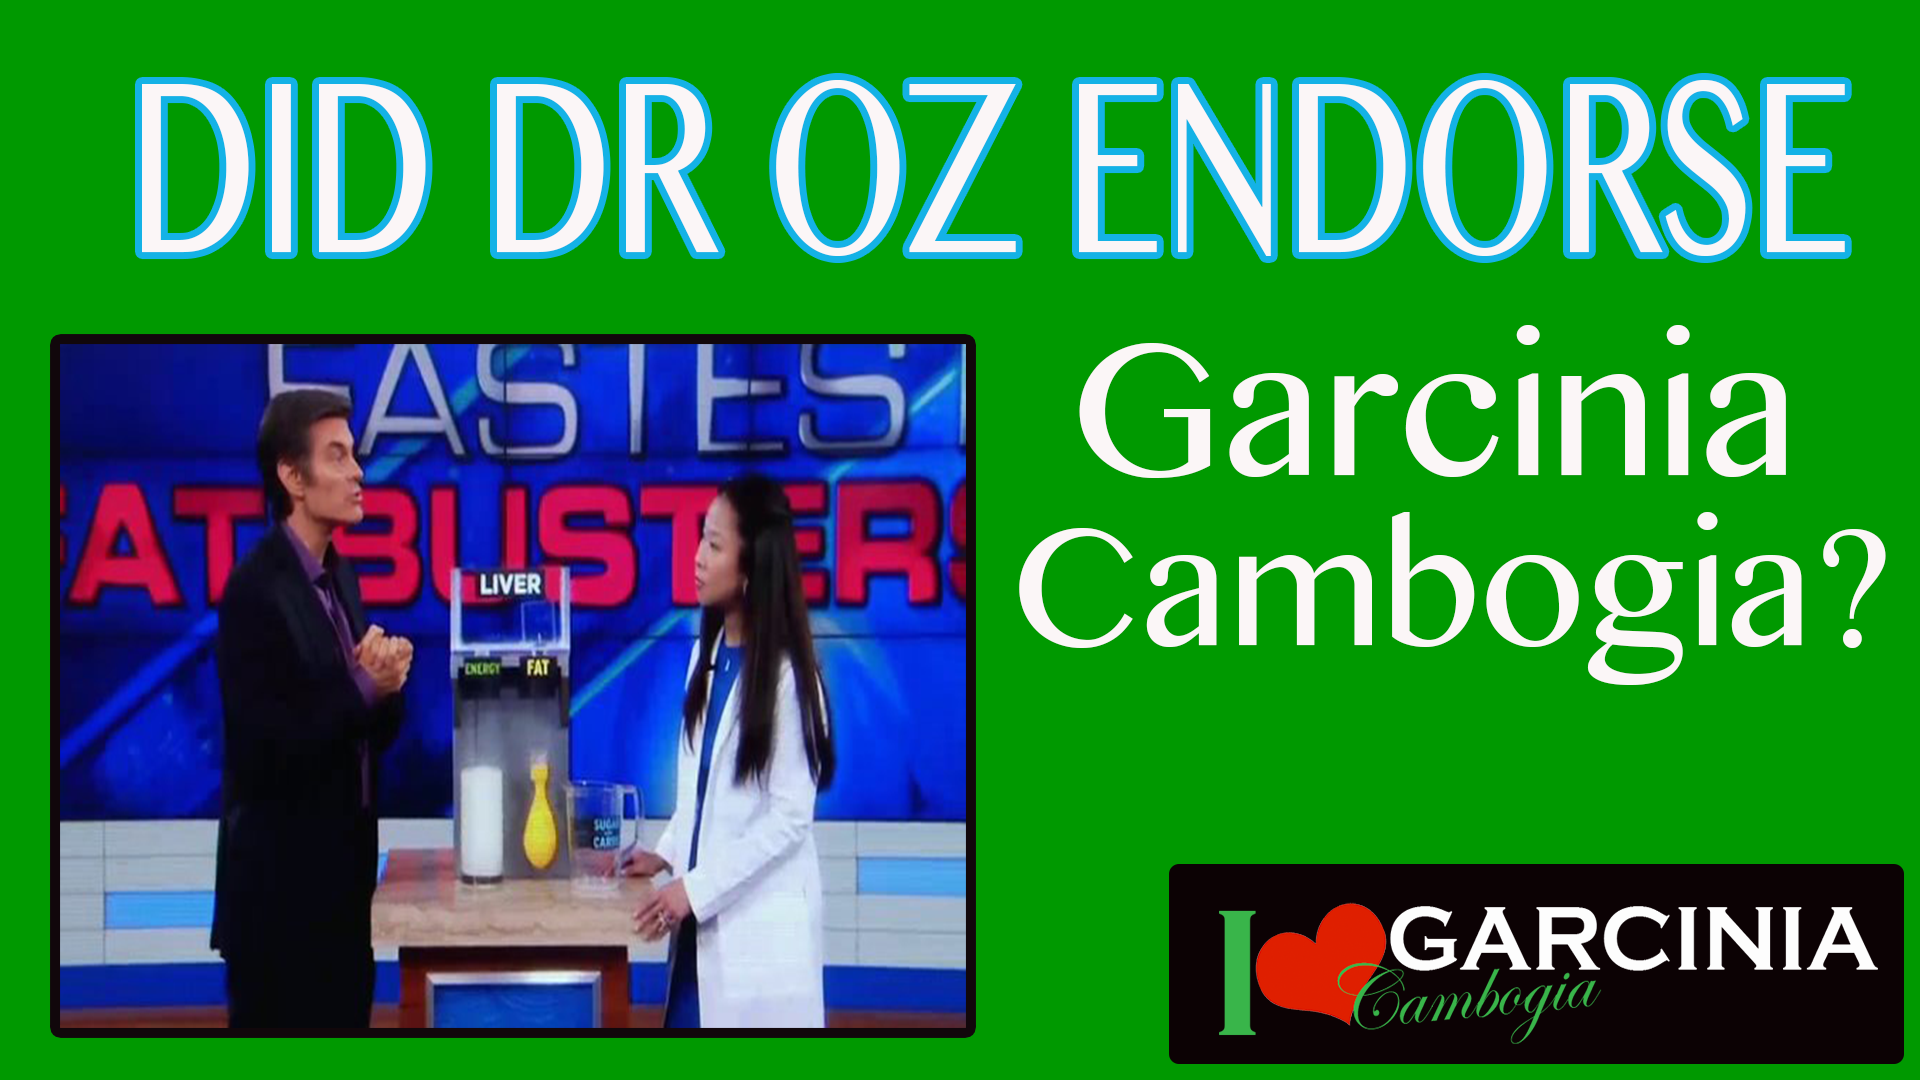 Did Dr Oz Really Endorse Garcinia Cambogia? Listen To Find Out!